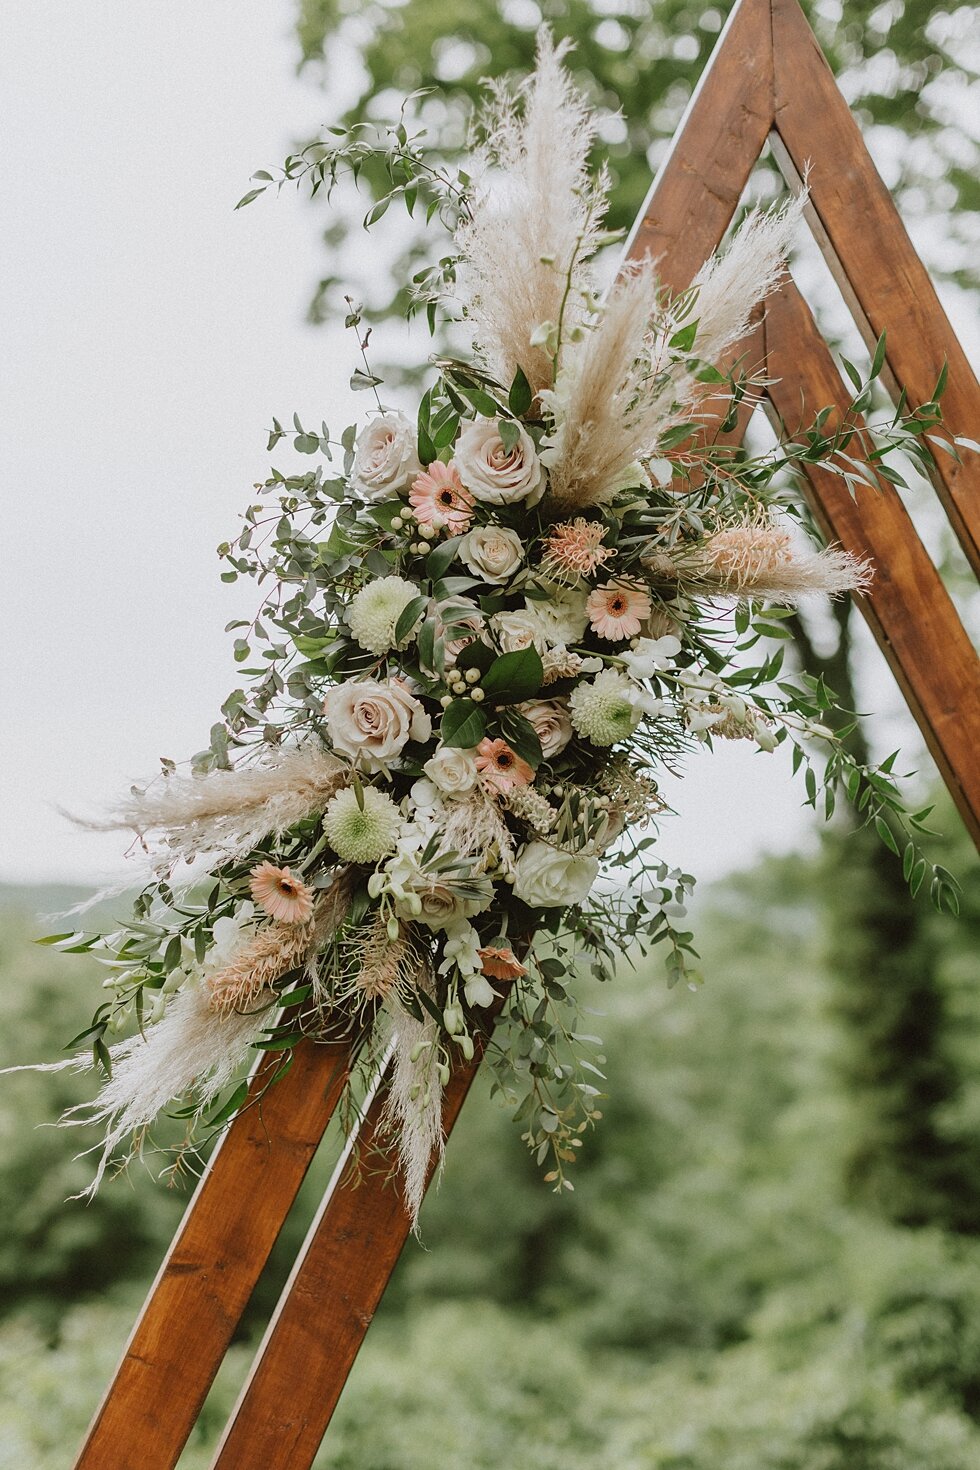  Stunning floral arrangement to accent the handcrafted arch for the elopement ceremony on a spring morning in the south. elopement goshen crest farm louisville kentucky elopement photographer simplistic sweet intimate stunning backyard farm wedding #